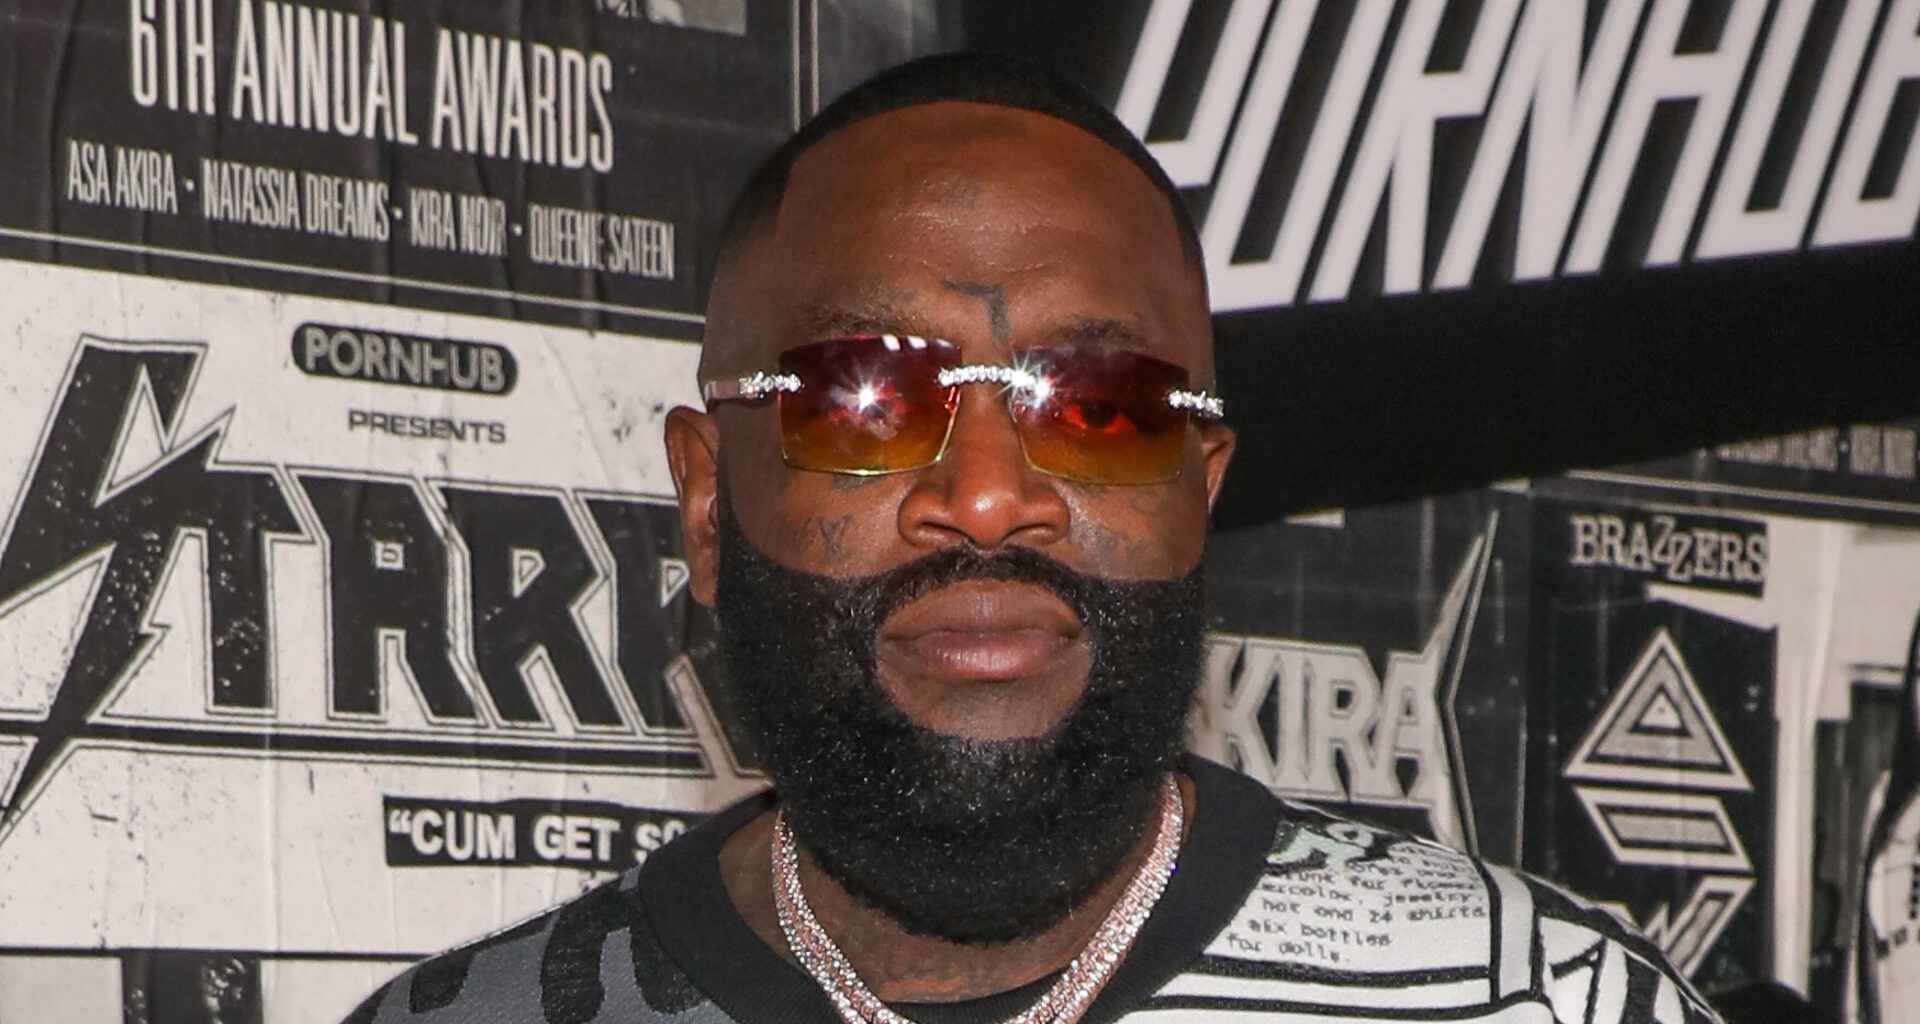 Rick Ross attacked at Canada concert for playing Kendrick Lamar diss track as 15 men approached rapper during brawl